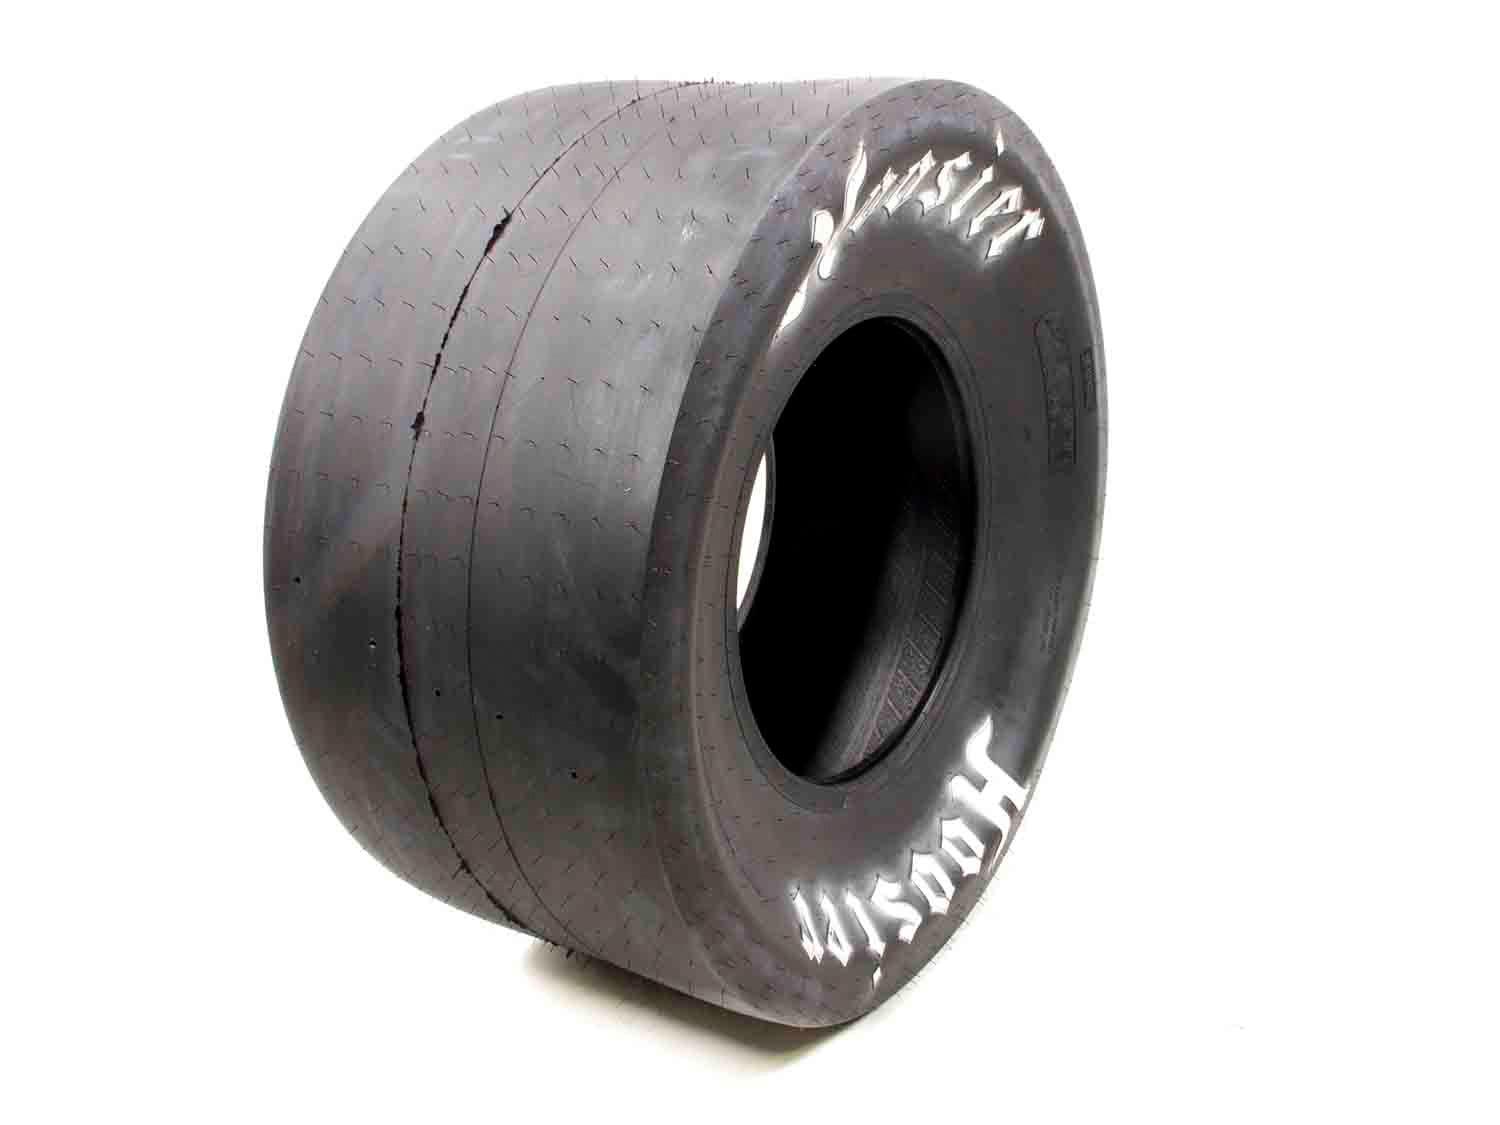 29.5/9.0-15R Radial Drag Tire - Burlile Performance Products